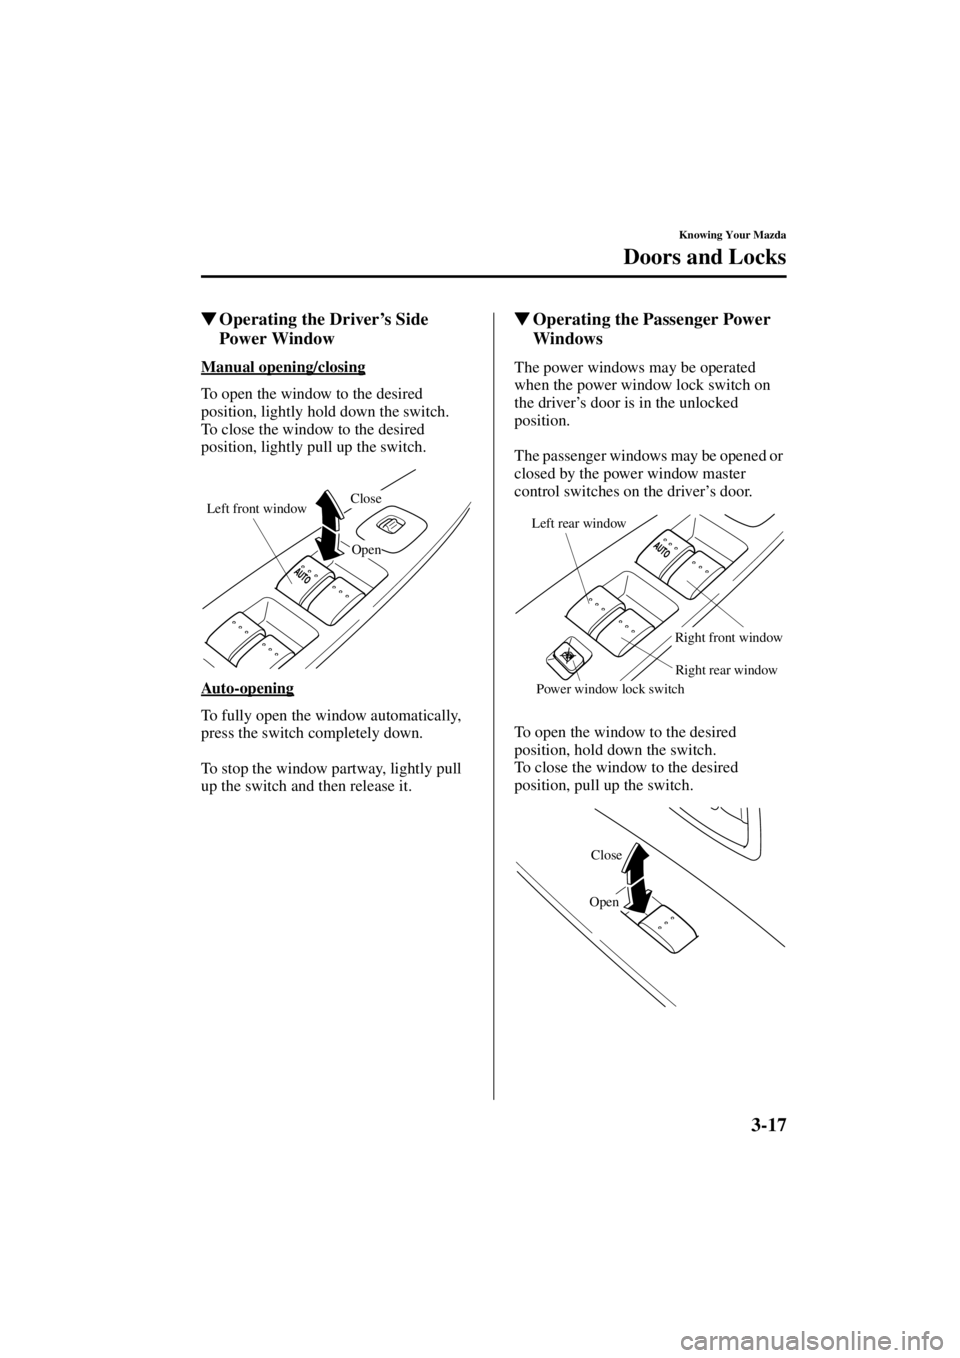 MAZDA MODEL 3 5-DOOR 2004 Owners Guide 3-17
Knowing Your Mazda
Doors and Locks
Form No. 8S18-EA-03I
Operating the Driver
’s Side 
Power Window
Manual opening/closing
To open the window to the desired 
position, lightly hold down the swi